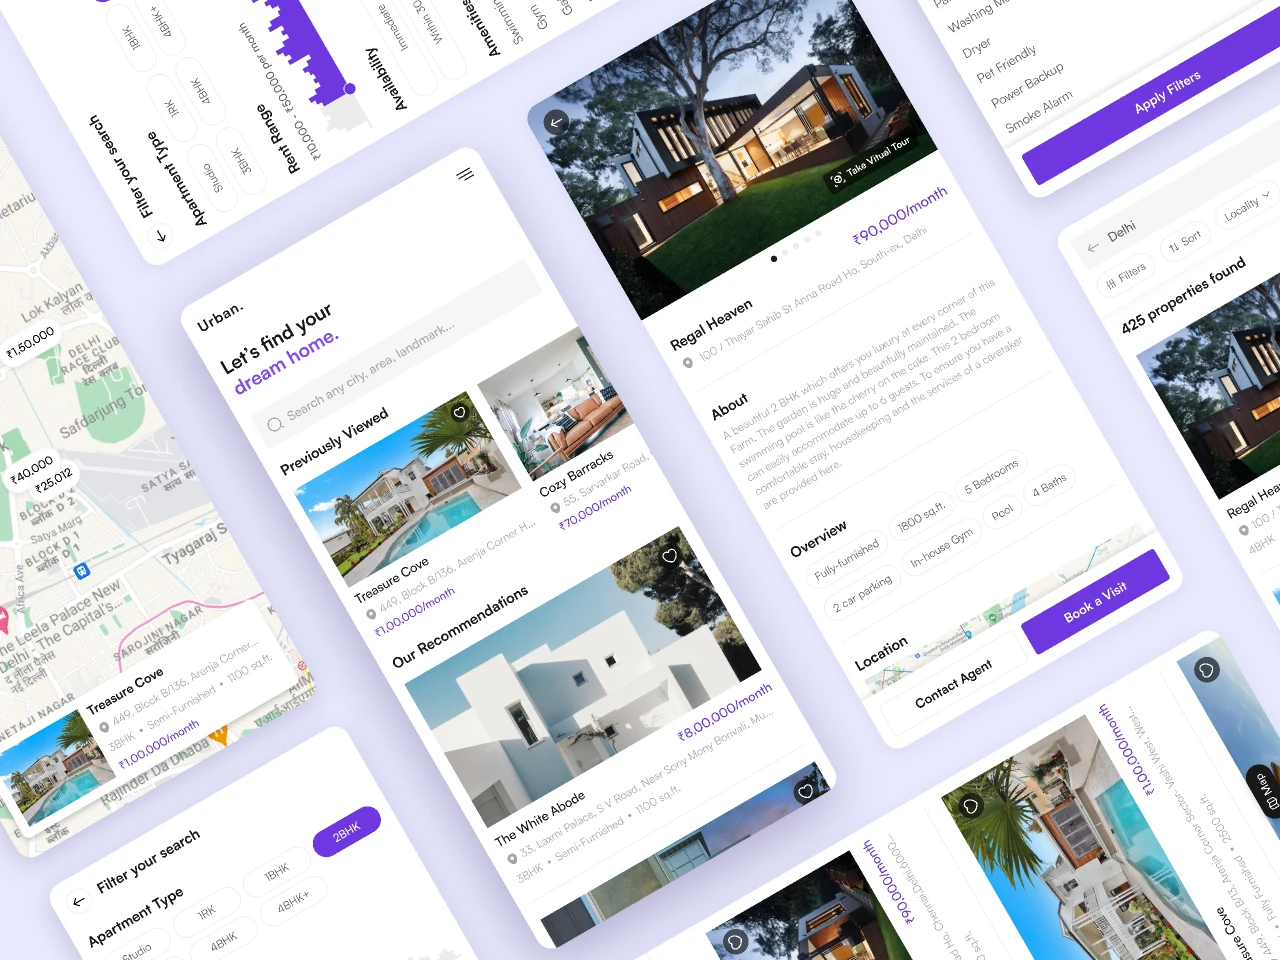 Property Rental App for Figma and Adobe XD